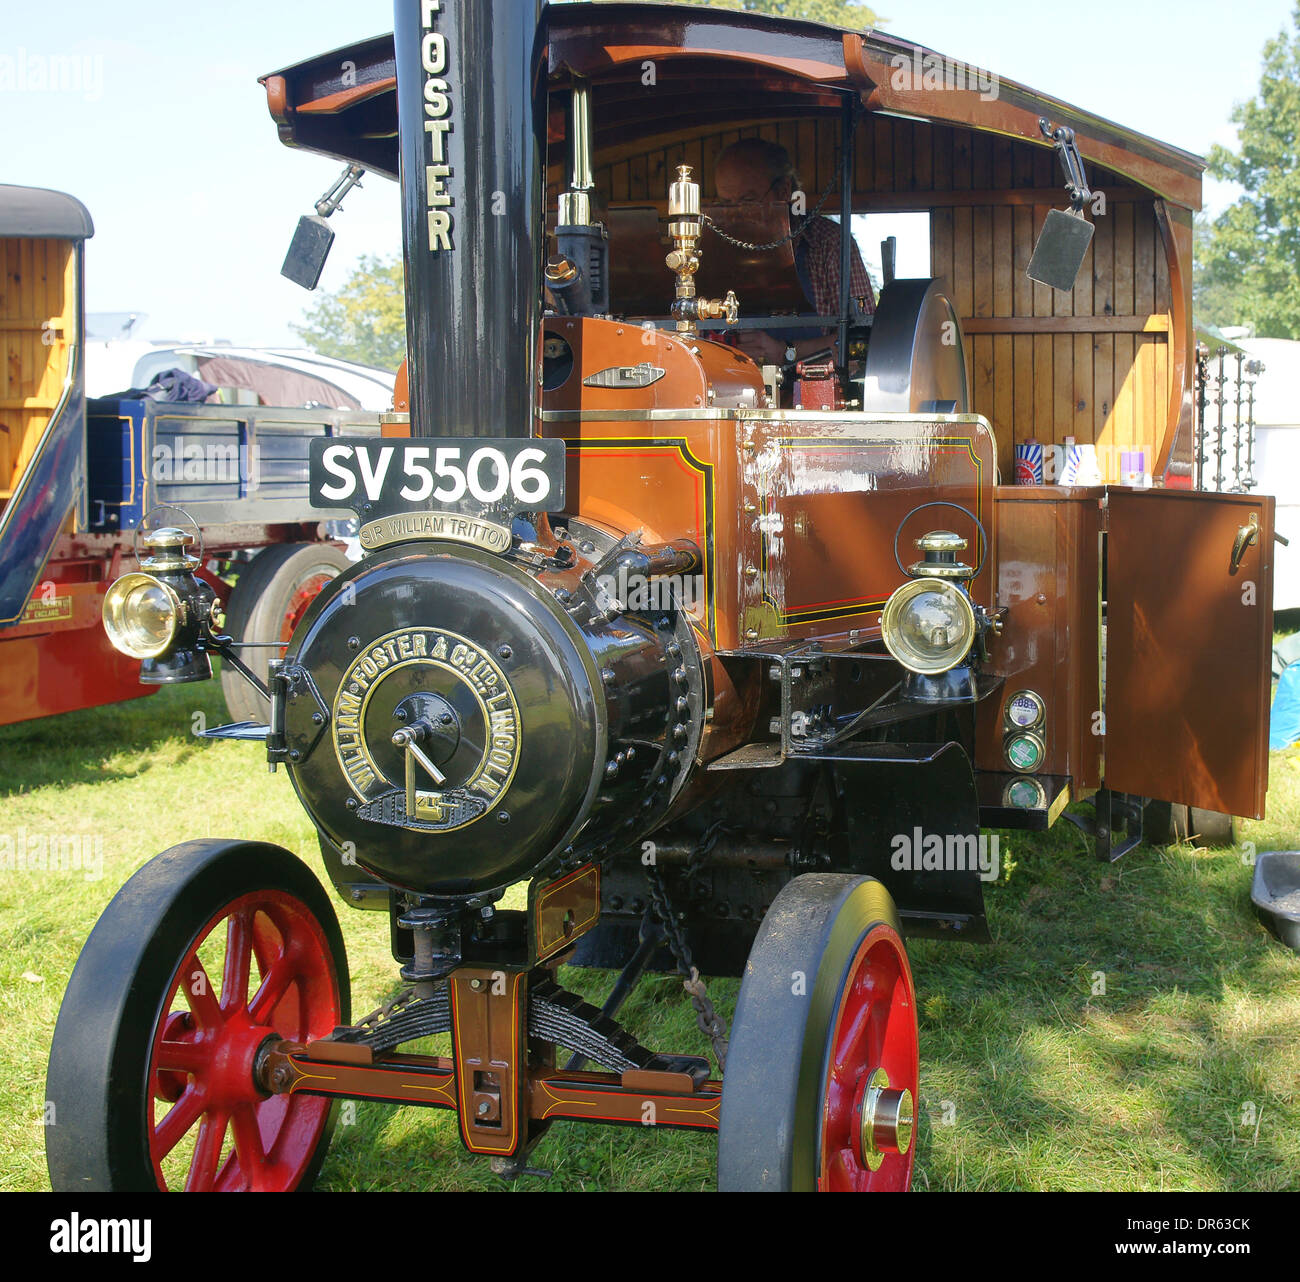 1921 Foster steam lorry 14470 SV5506 Sir William Tritton at Bedford Steam Rally at Shuttleworth Park Stock Photo